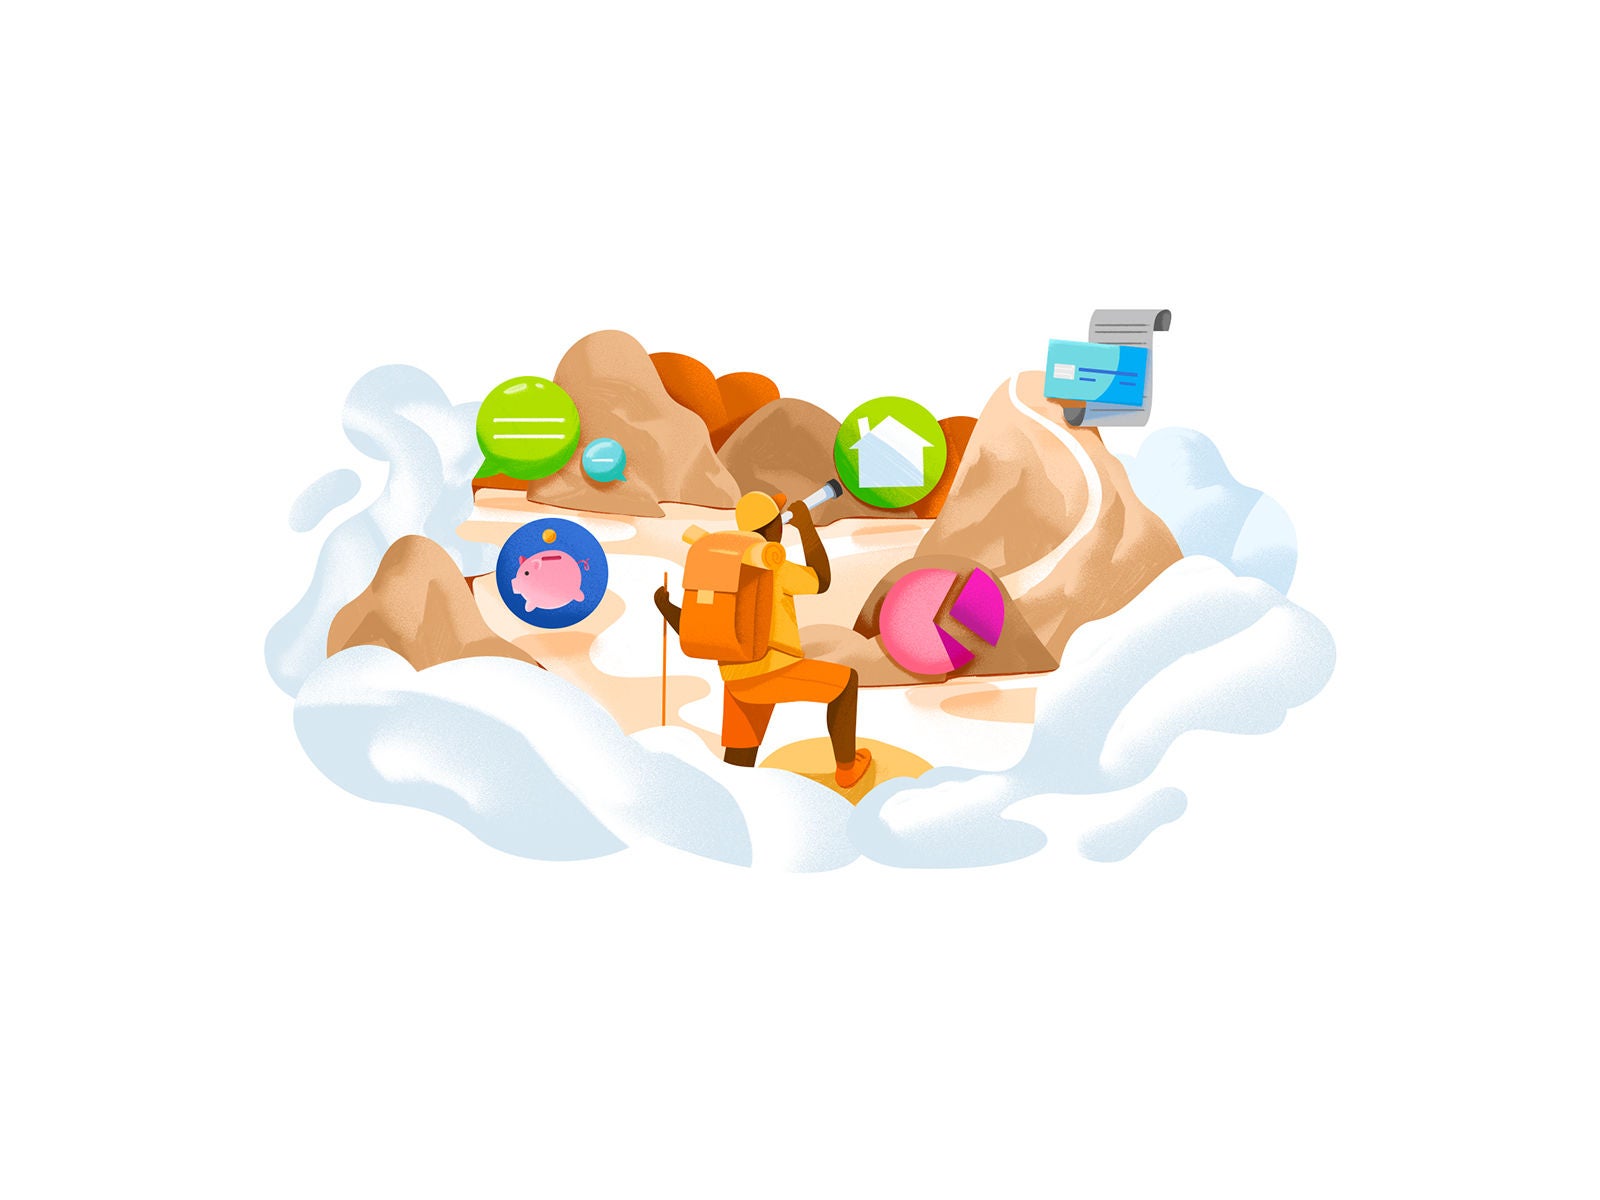 An illustrated explorer with a large backpack, using a telescope to look at finance themed icons scattered through mountains.